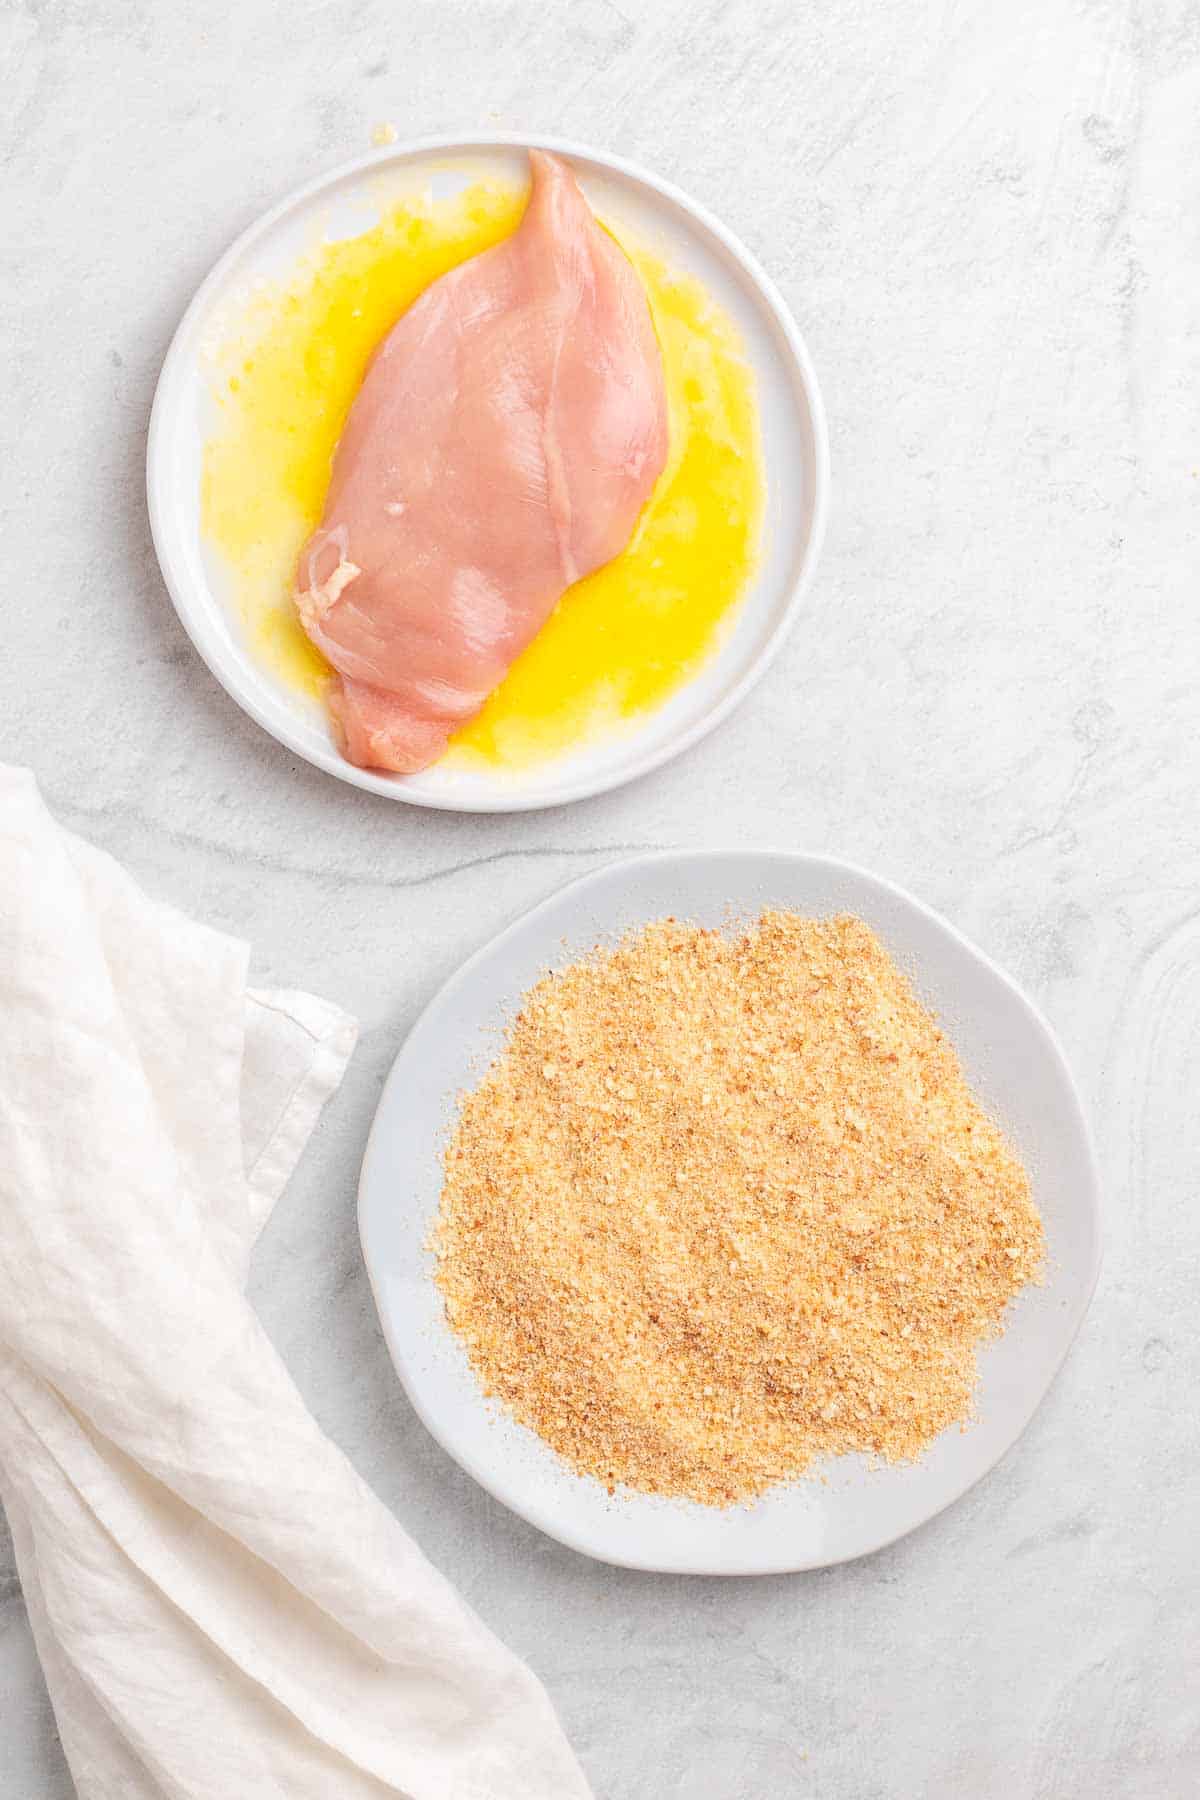 A flattened chicken breast in the lemon and butter mixture on a white plate next to another white plate of low-carb breadcrumbs, as seen from above